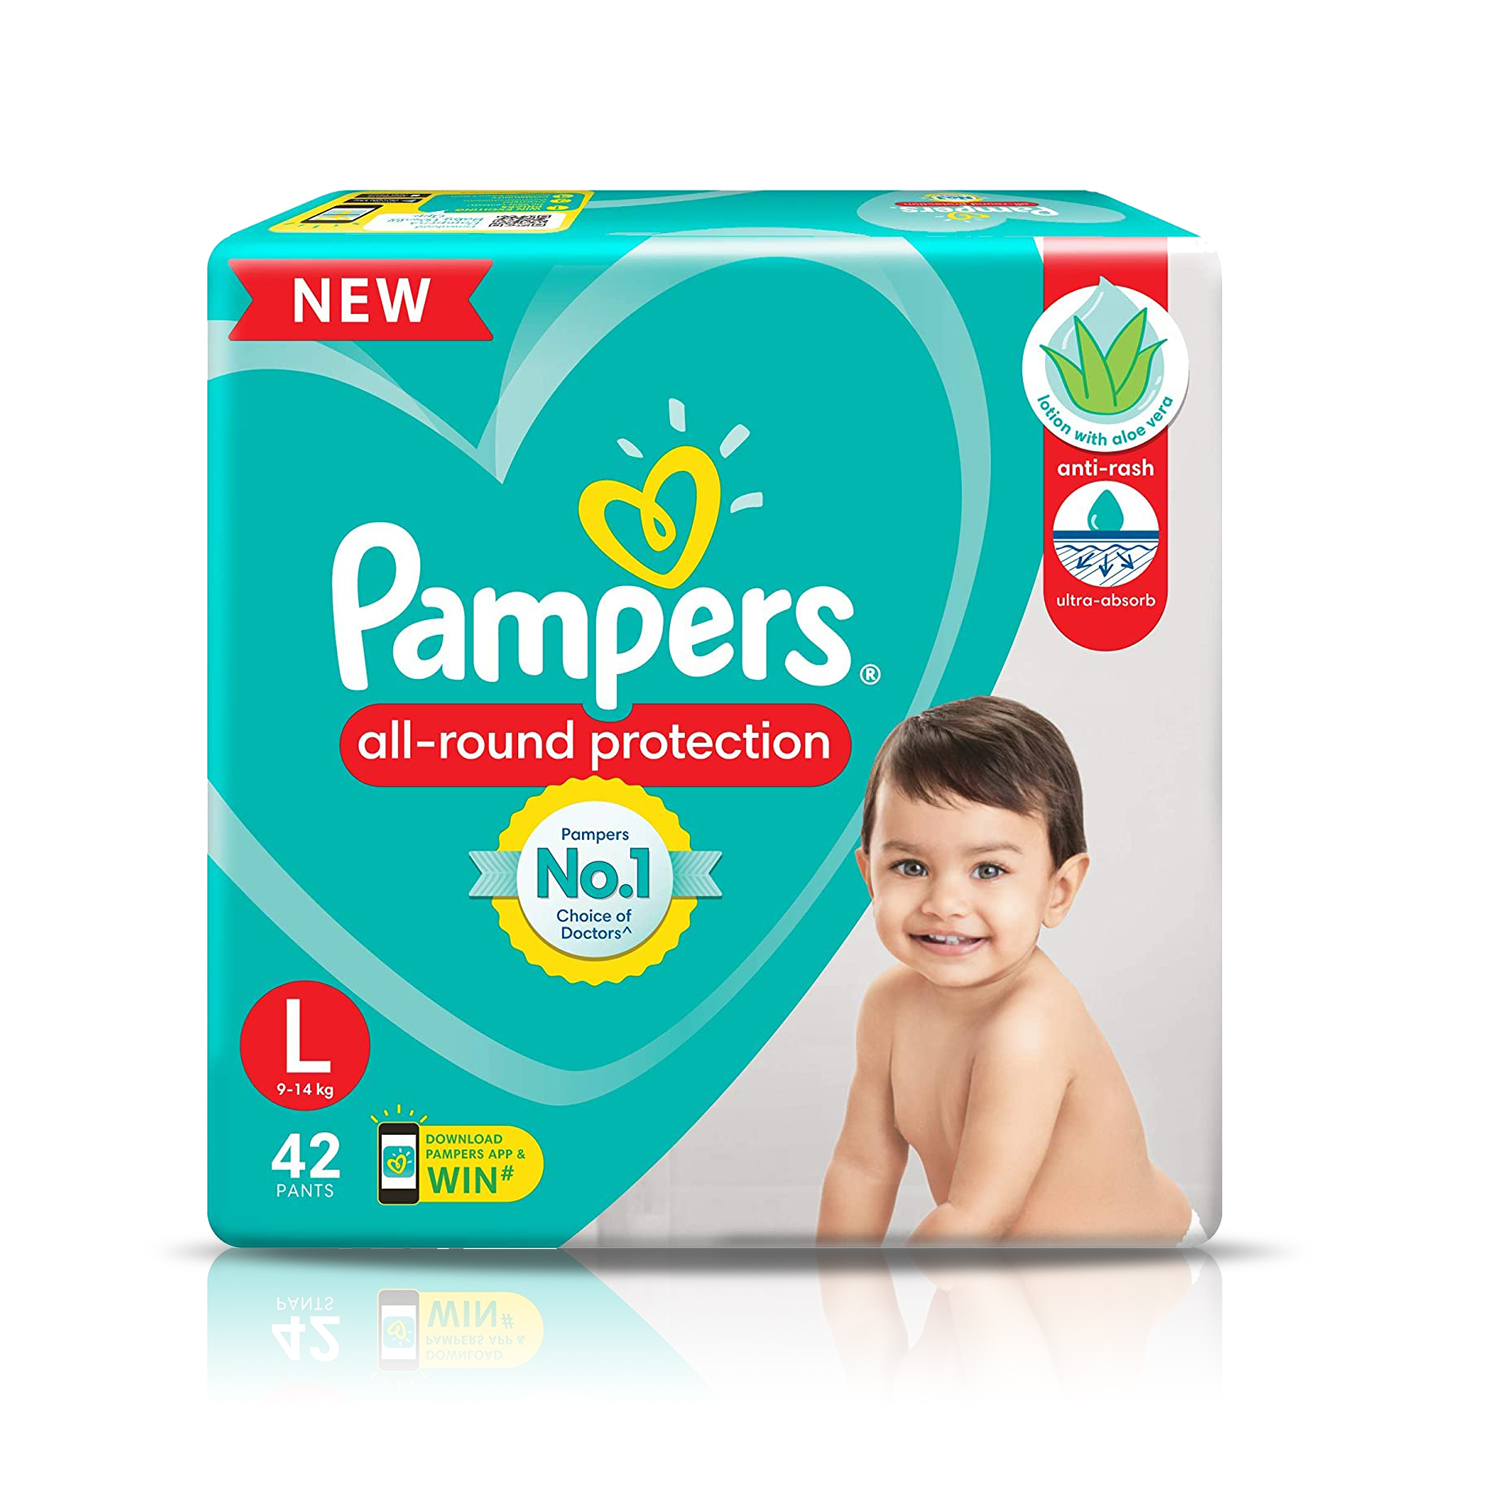 Pampers All-round P. Baby Diaper L (9-14 Kg) 42 Pants